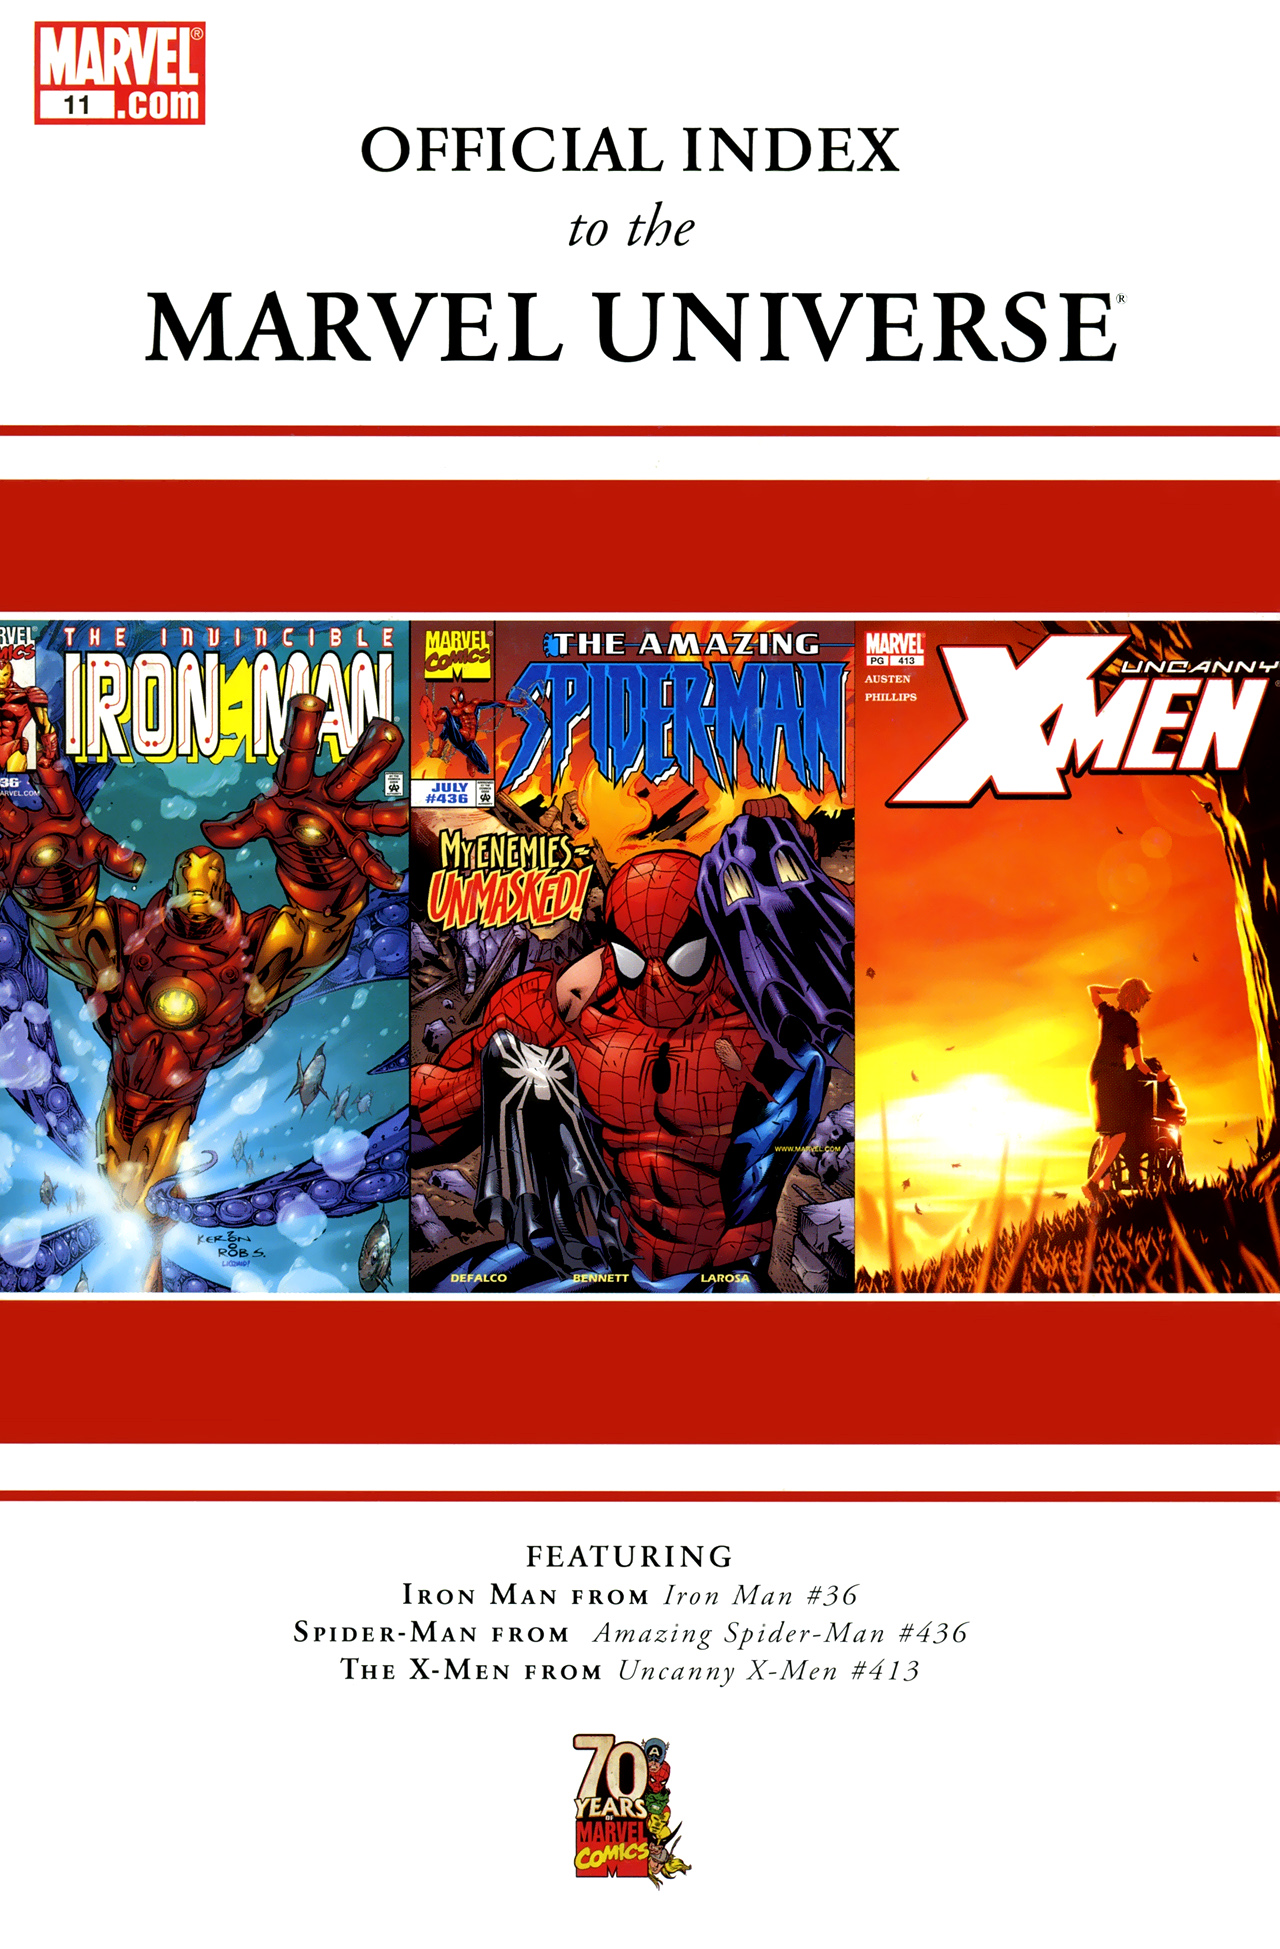 Read online Official Index to the Marvel Universe comic -  Issue #11 - 1